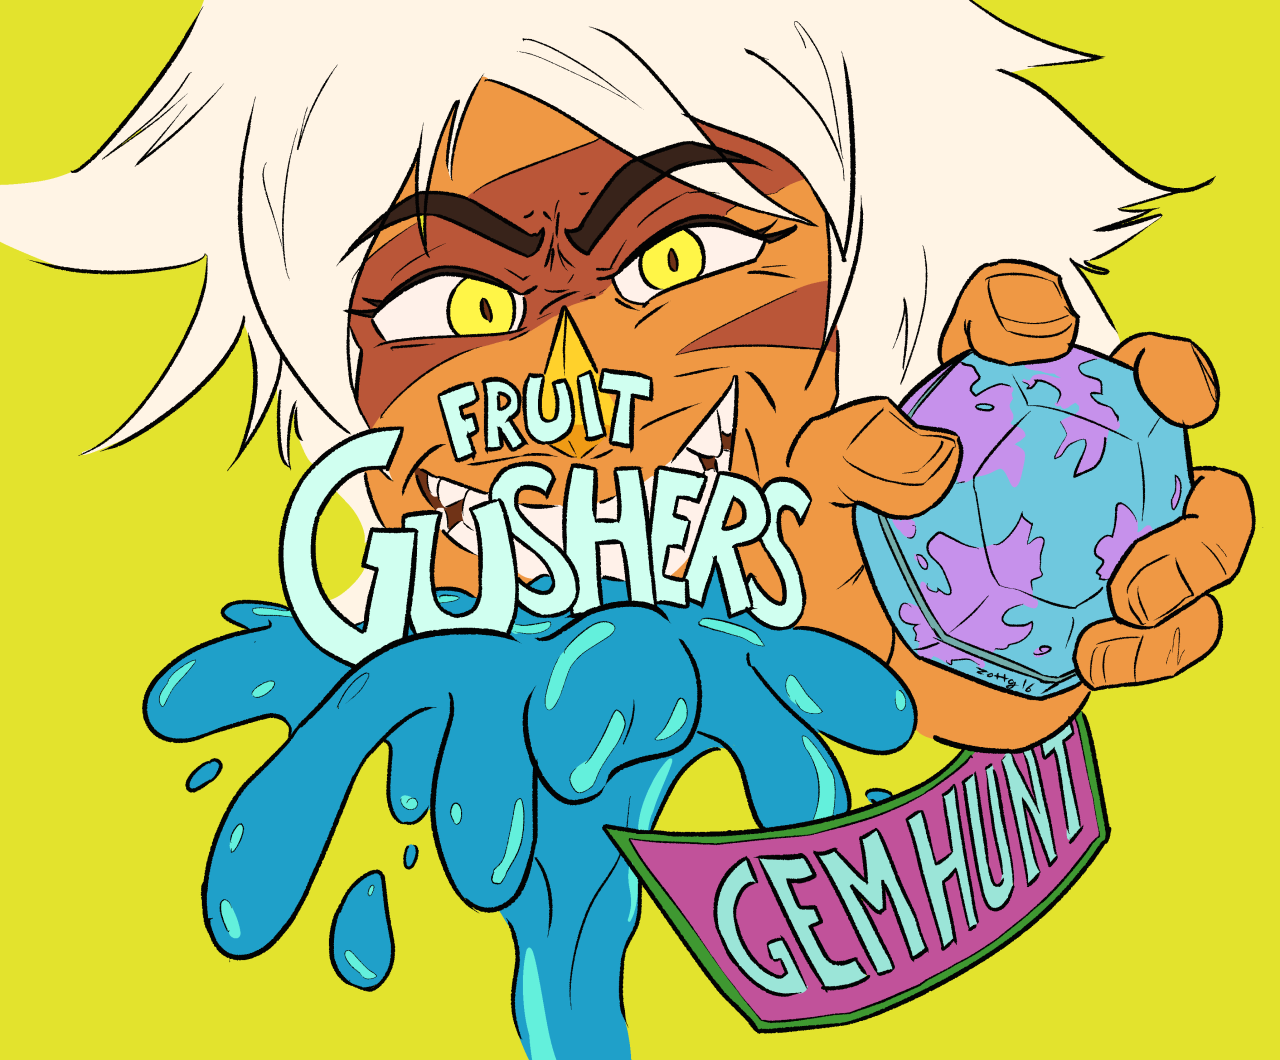 remember {the thing from your childhood}?
that one scene kinda looked like a fruit gushers promo to me. and the line jasper said almost sounded like some villain mascot get away line. kind of a …...